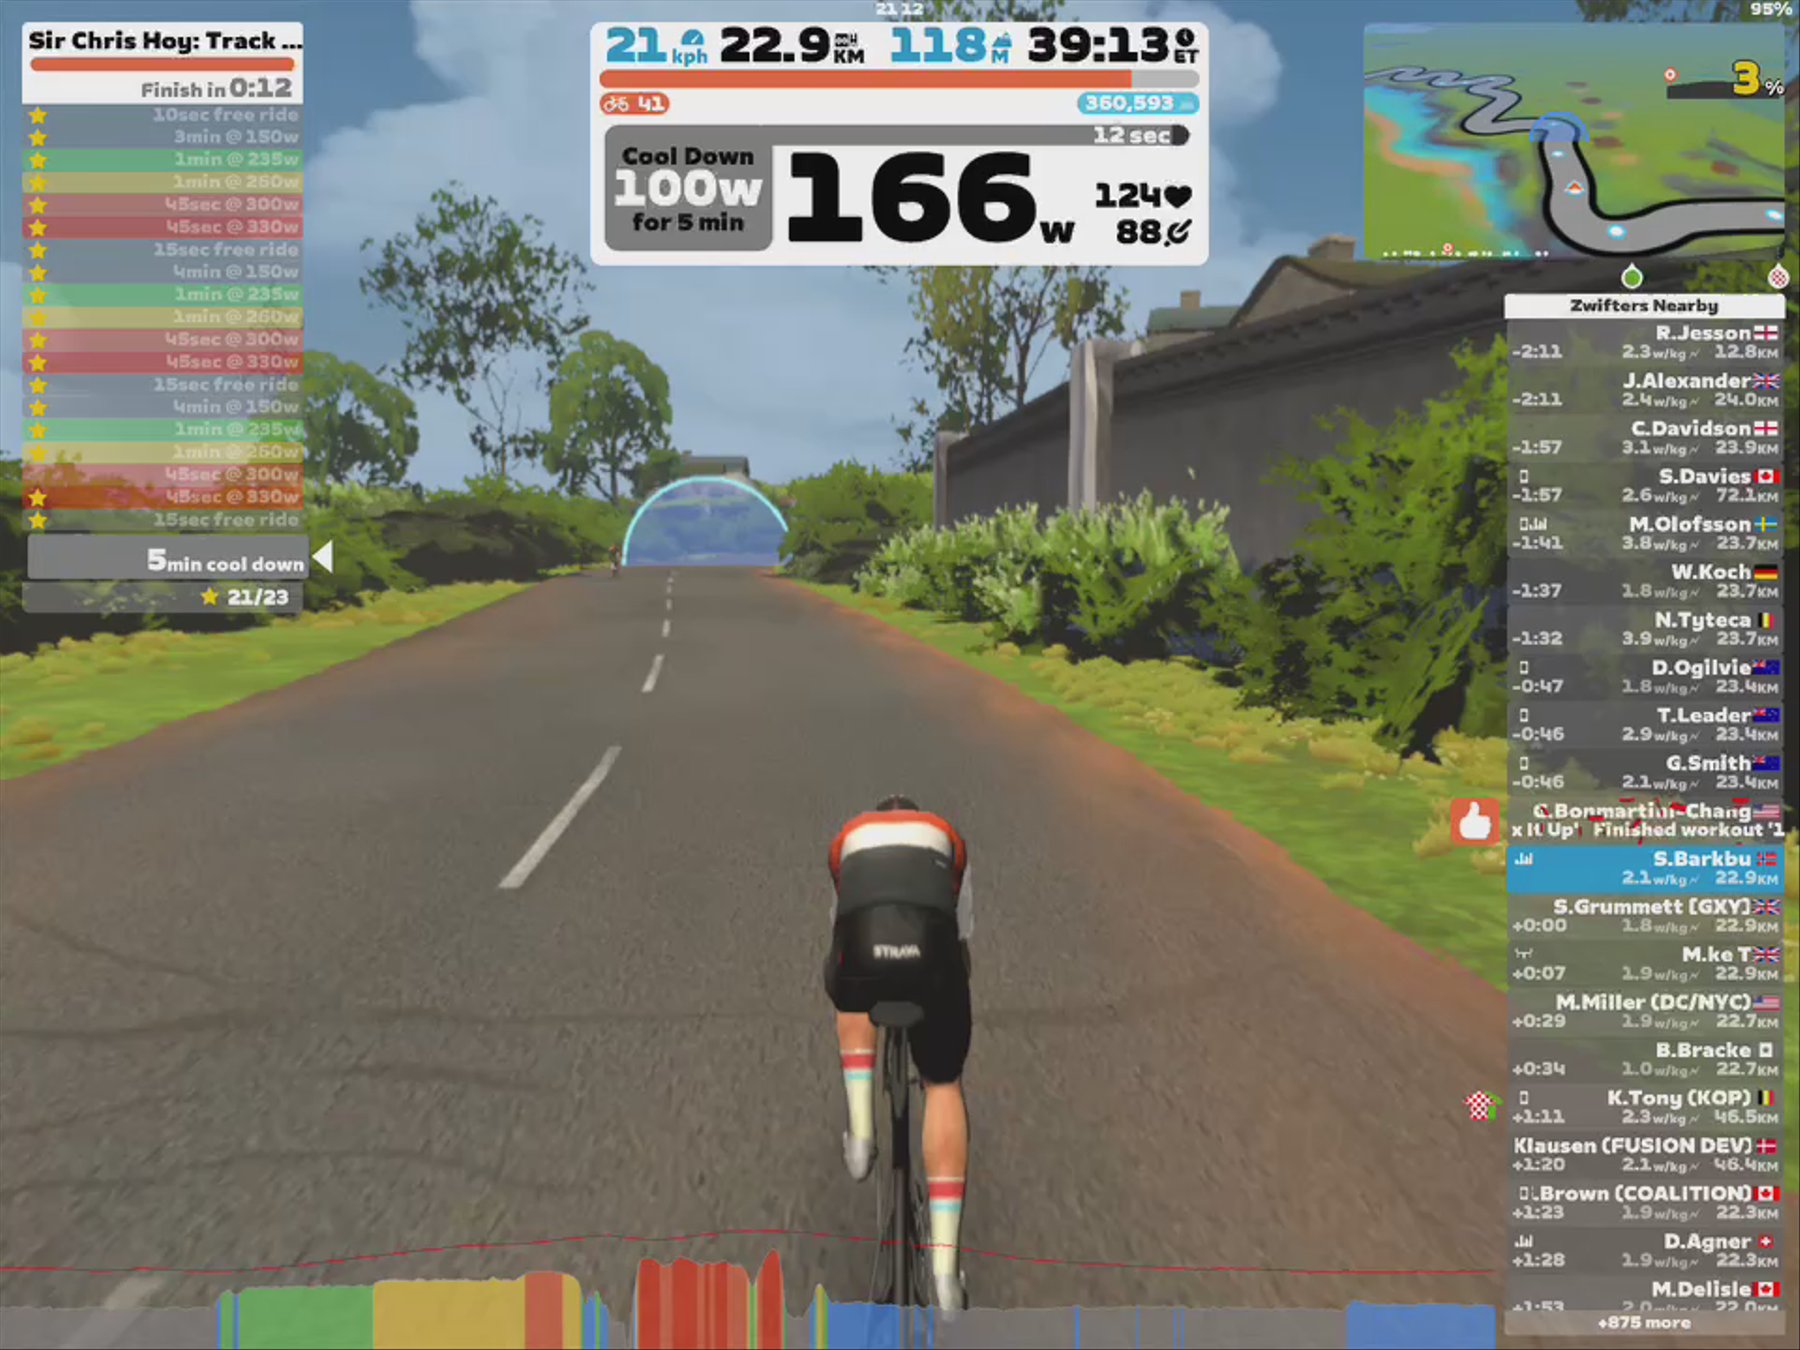 Zwift - Sir Chris Hoy: Track Sprints in France